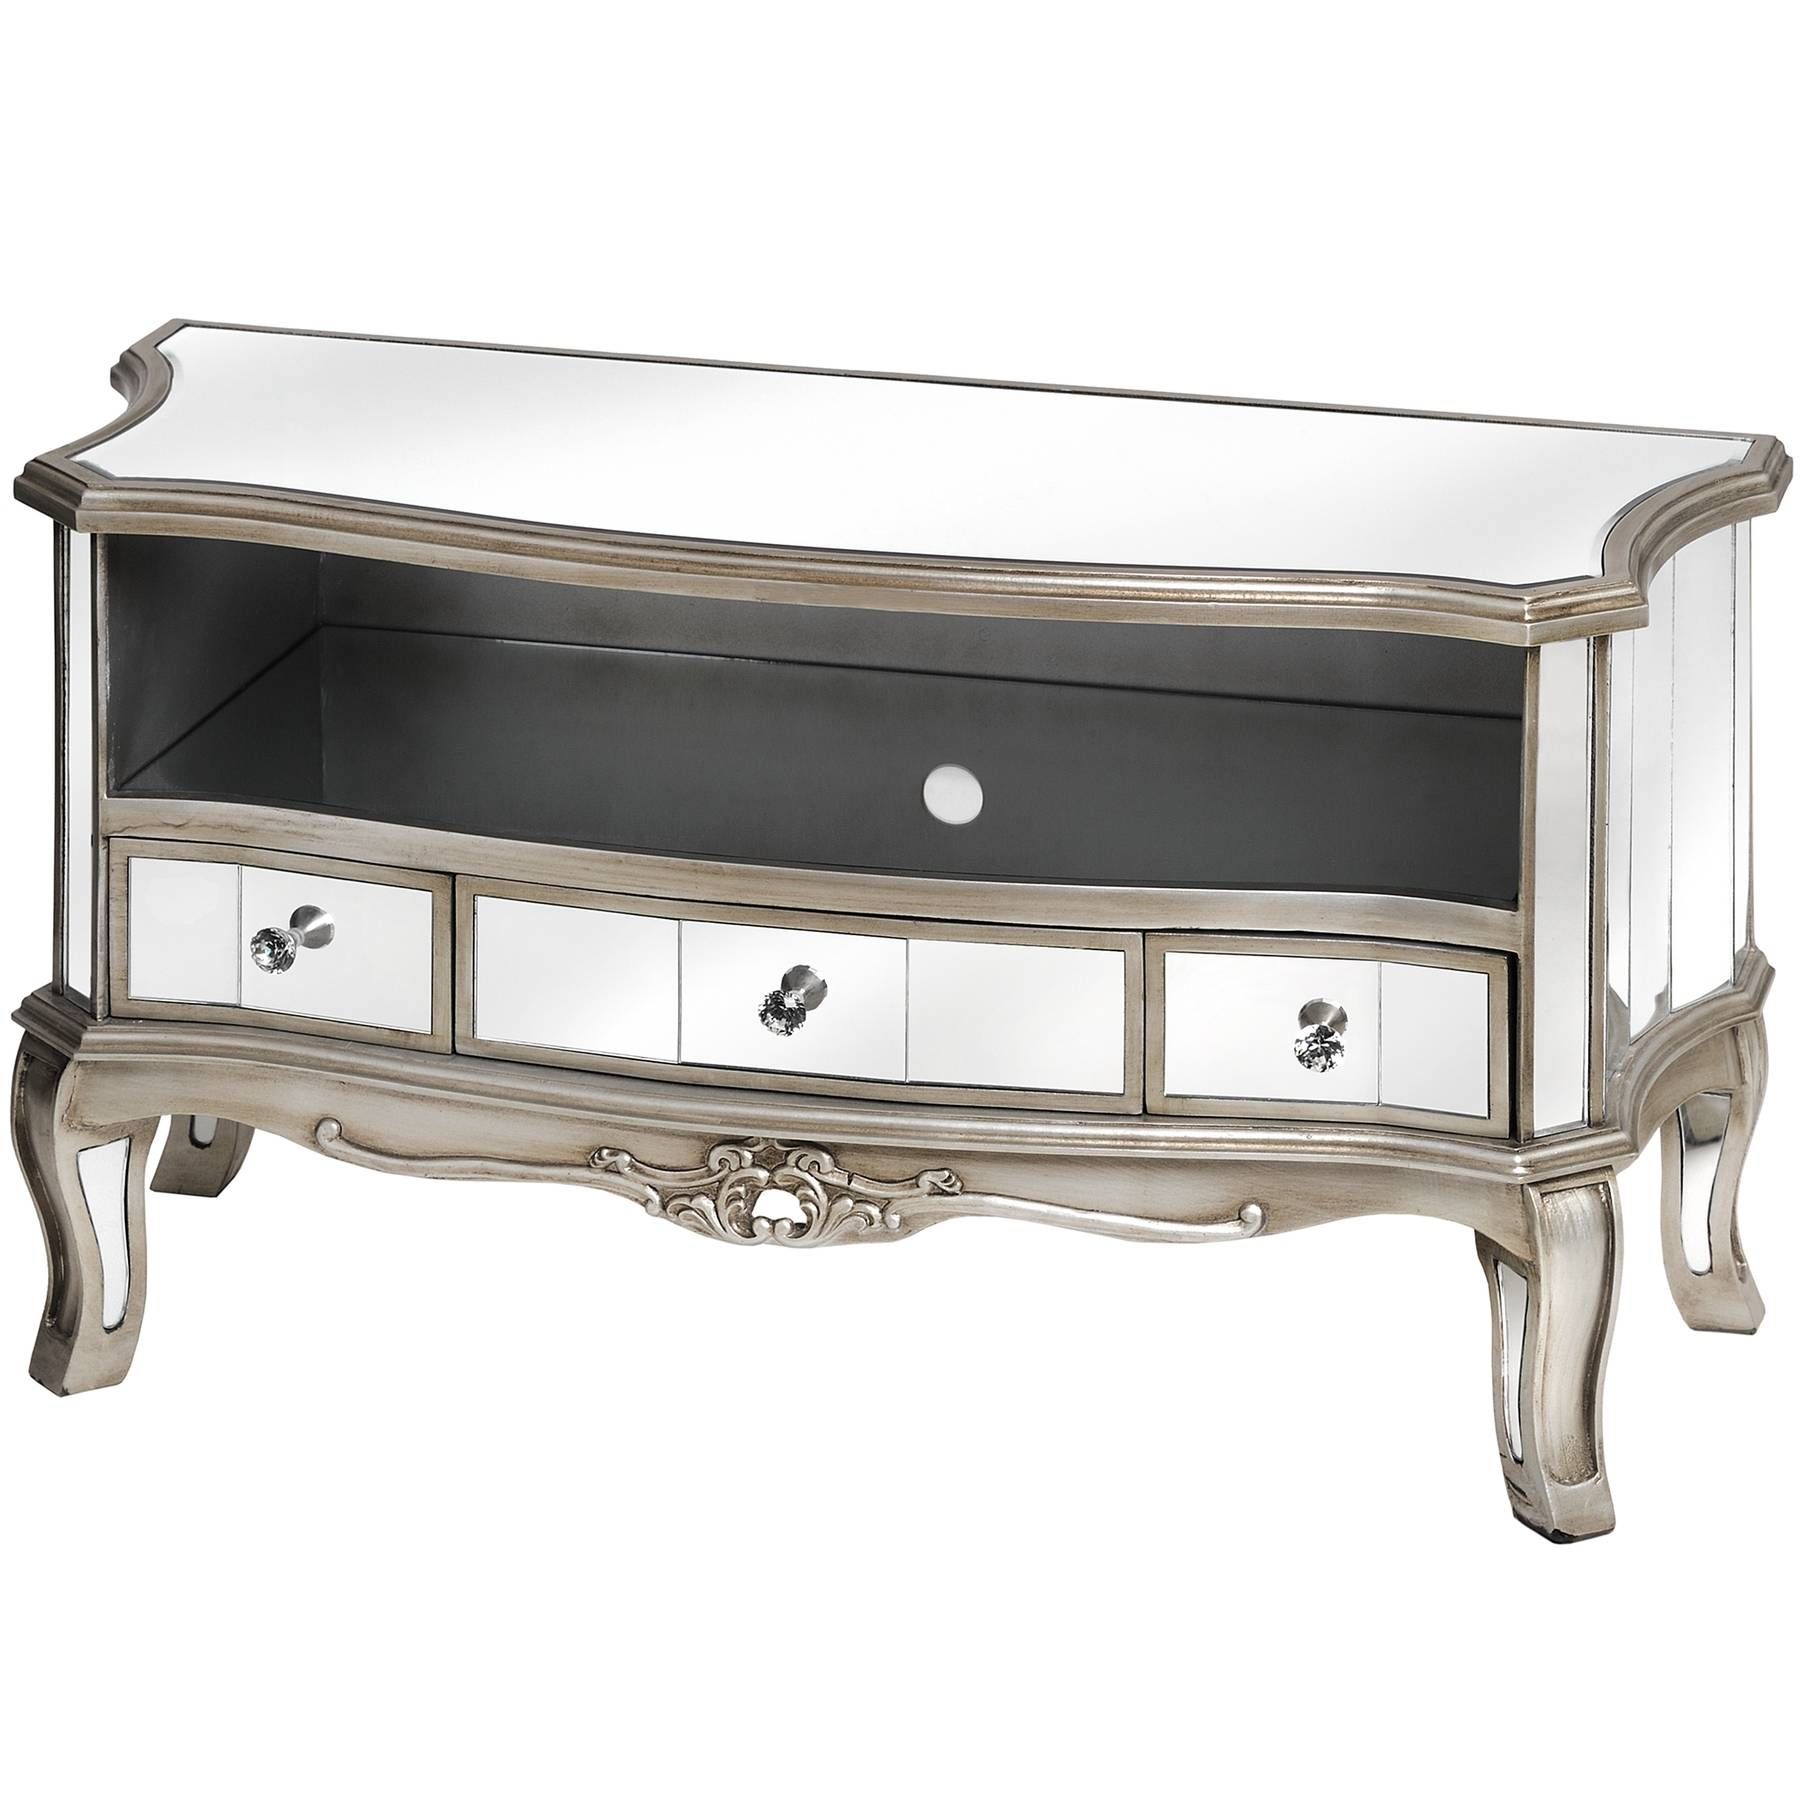 Argente Mirrored Television Cabinet | From Baytree Interiors Pertaining To Mirrored Tv Stands (View 8 of 15)